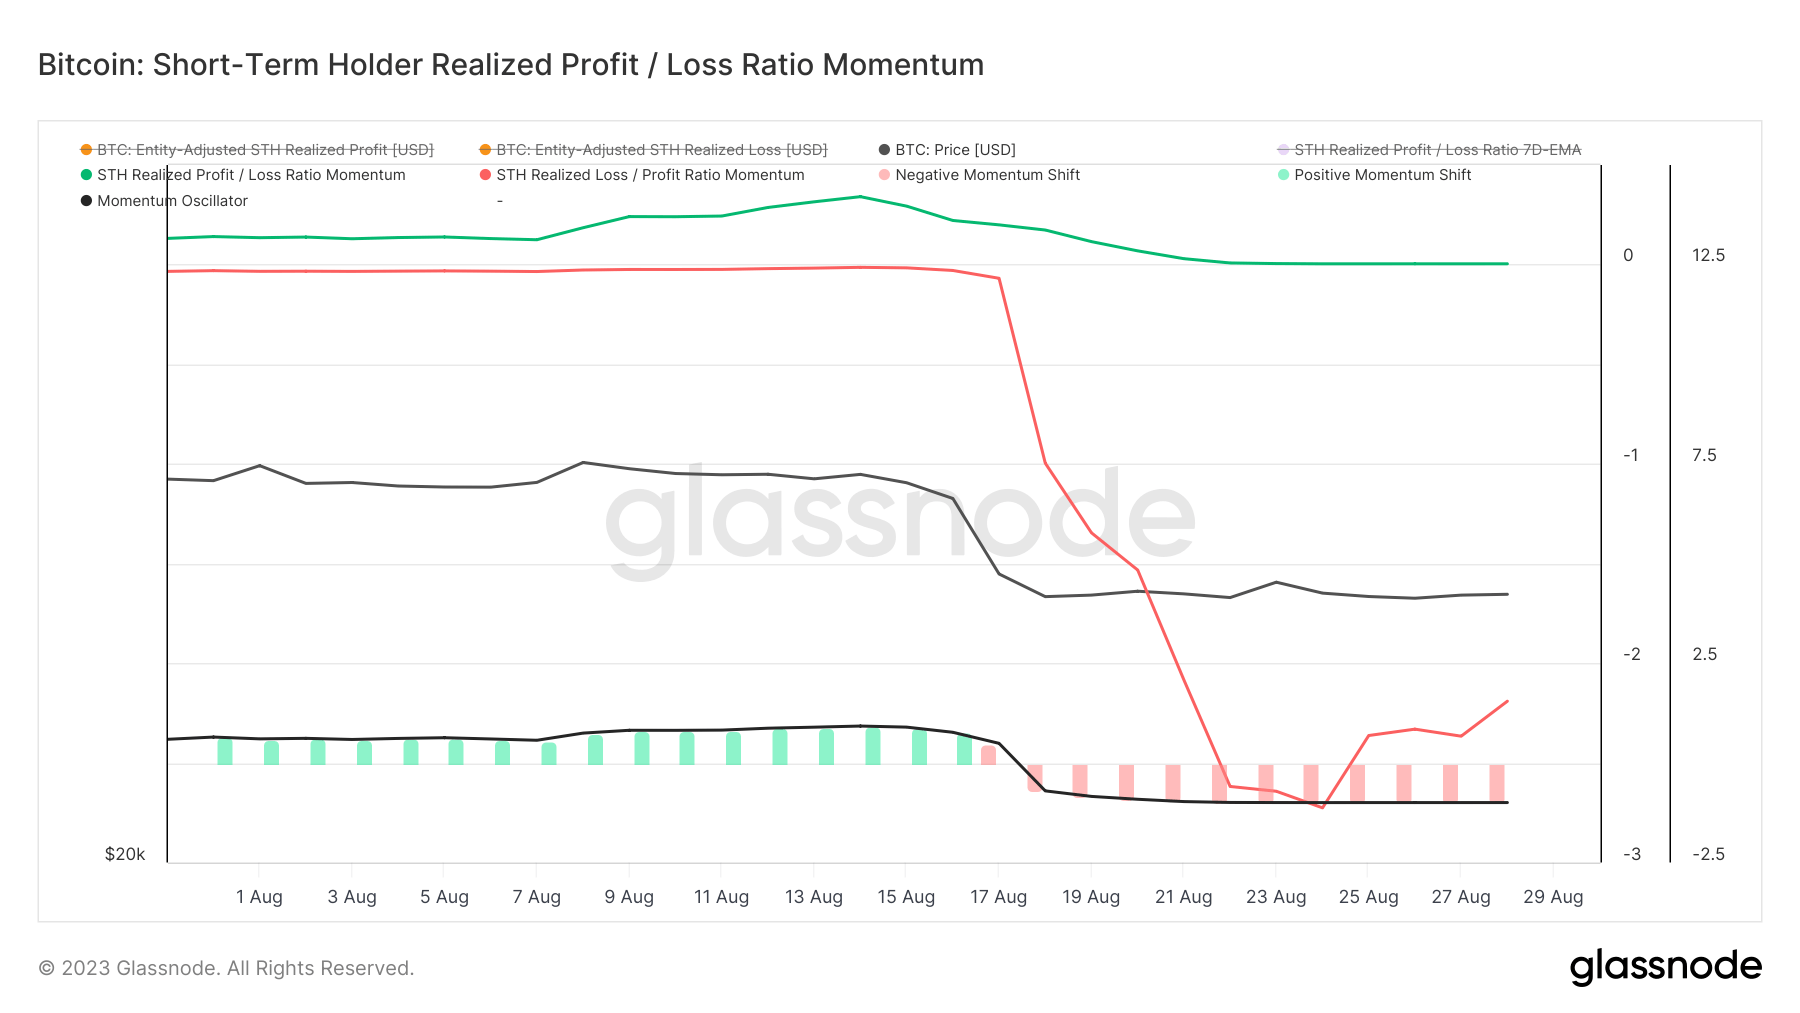 STH realized loss momentum 1mo